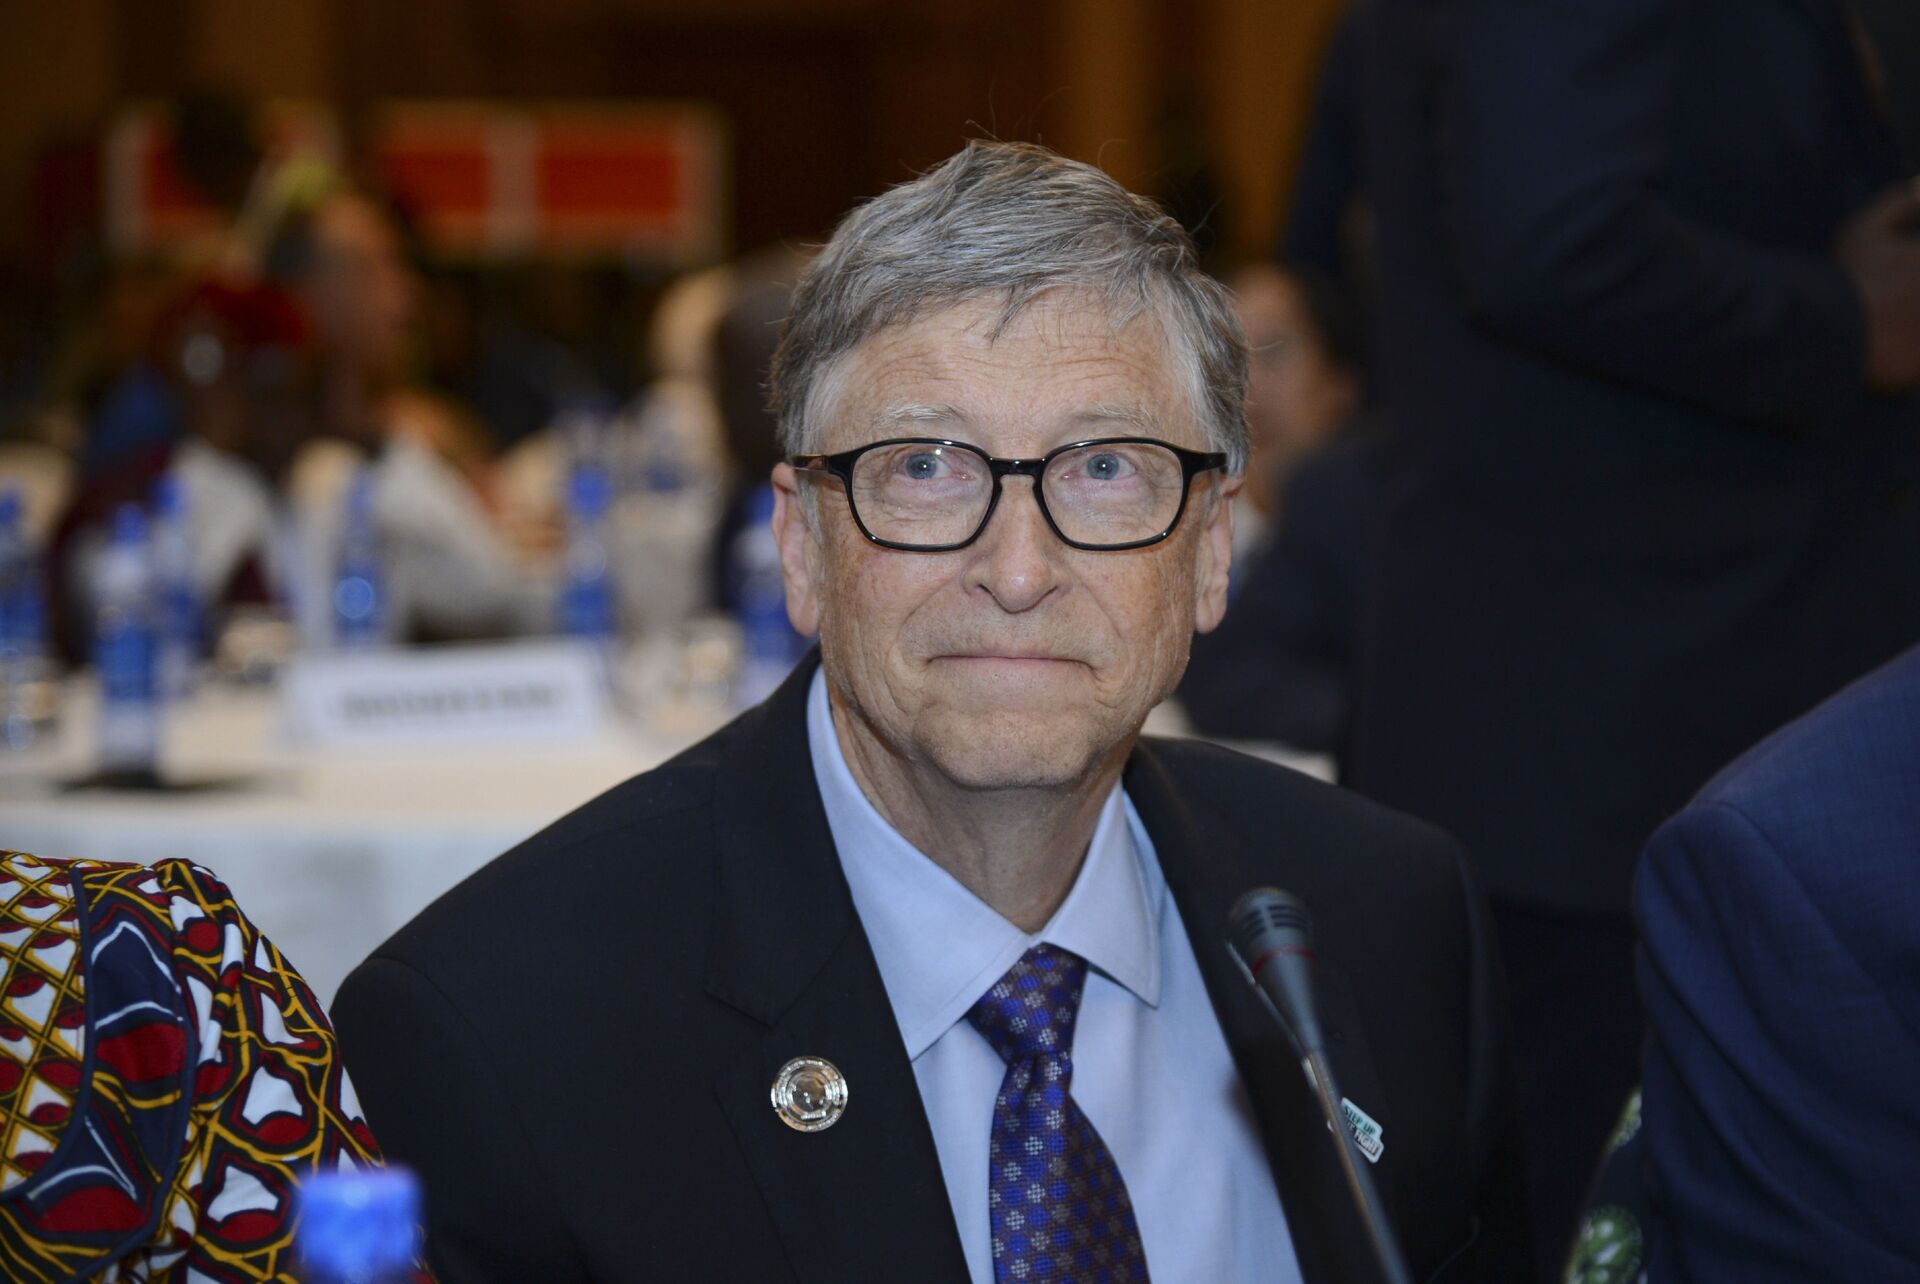 Bill Gates, chairman of the Bill & Melinda Gates Foundation, attends the Africa Leadership Meeting - Investing in Health Outcomes held at a hotel in Addis Ababa, Ethiopia Saturday, Feb. 9, 2019.  - Sputnik International, 1920, 17.11.2021